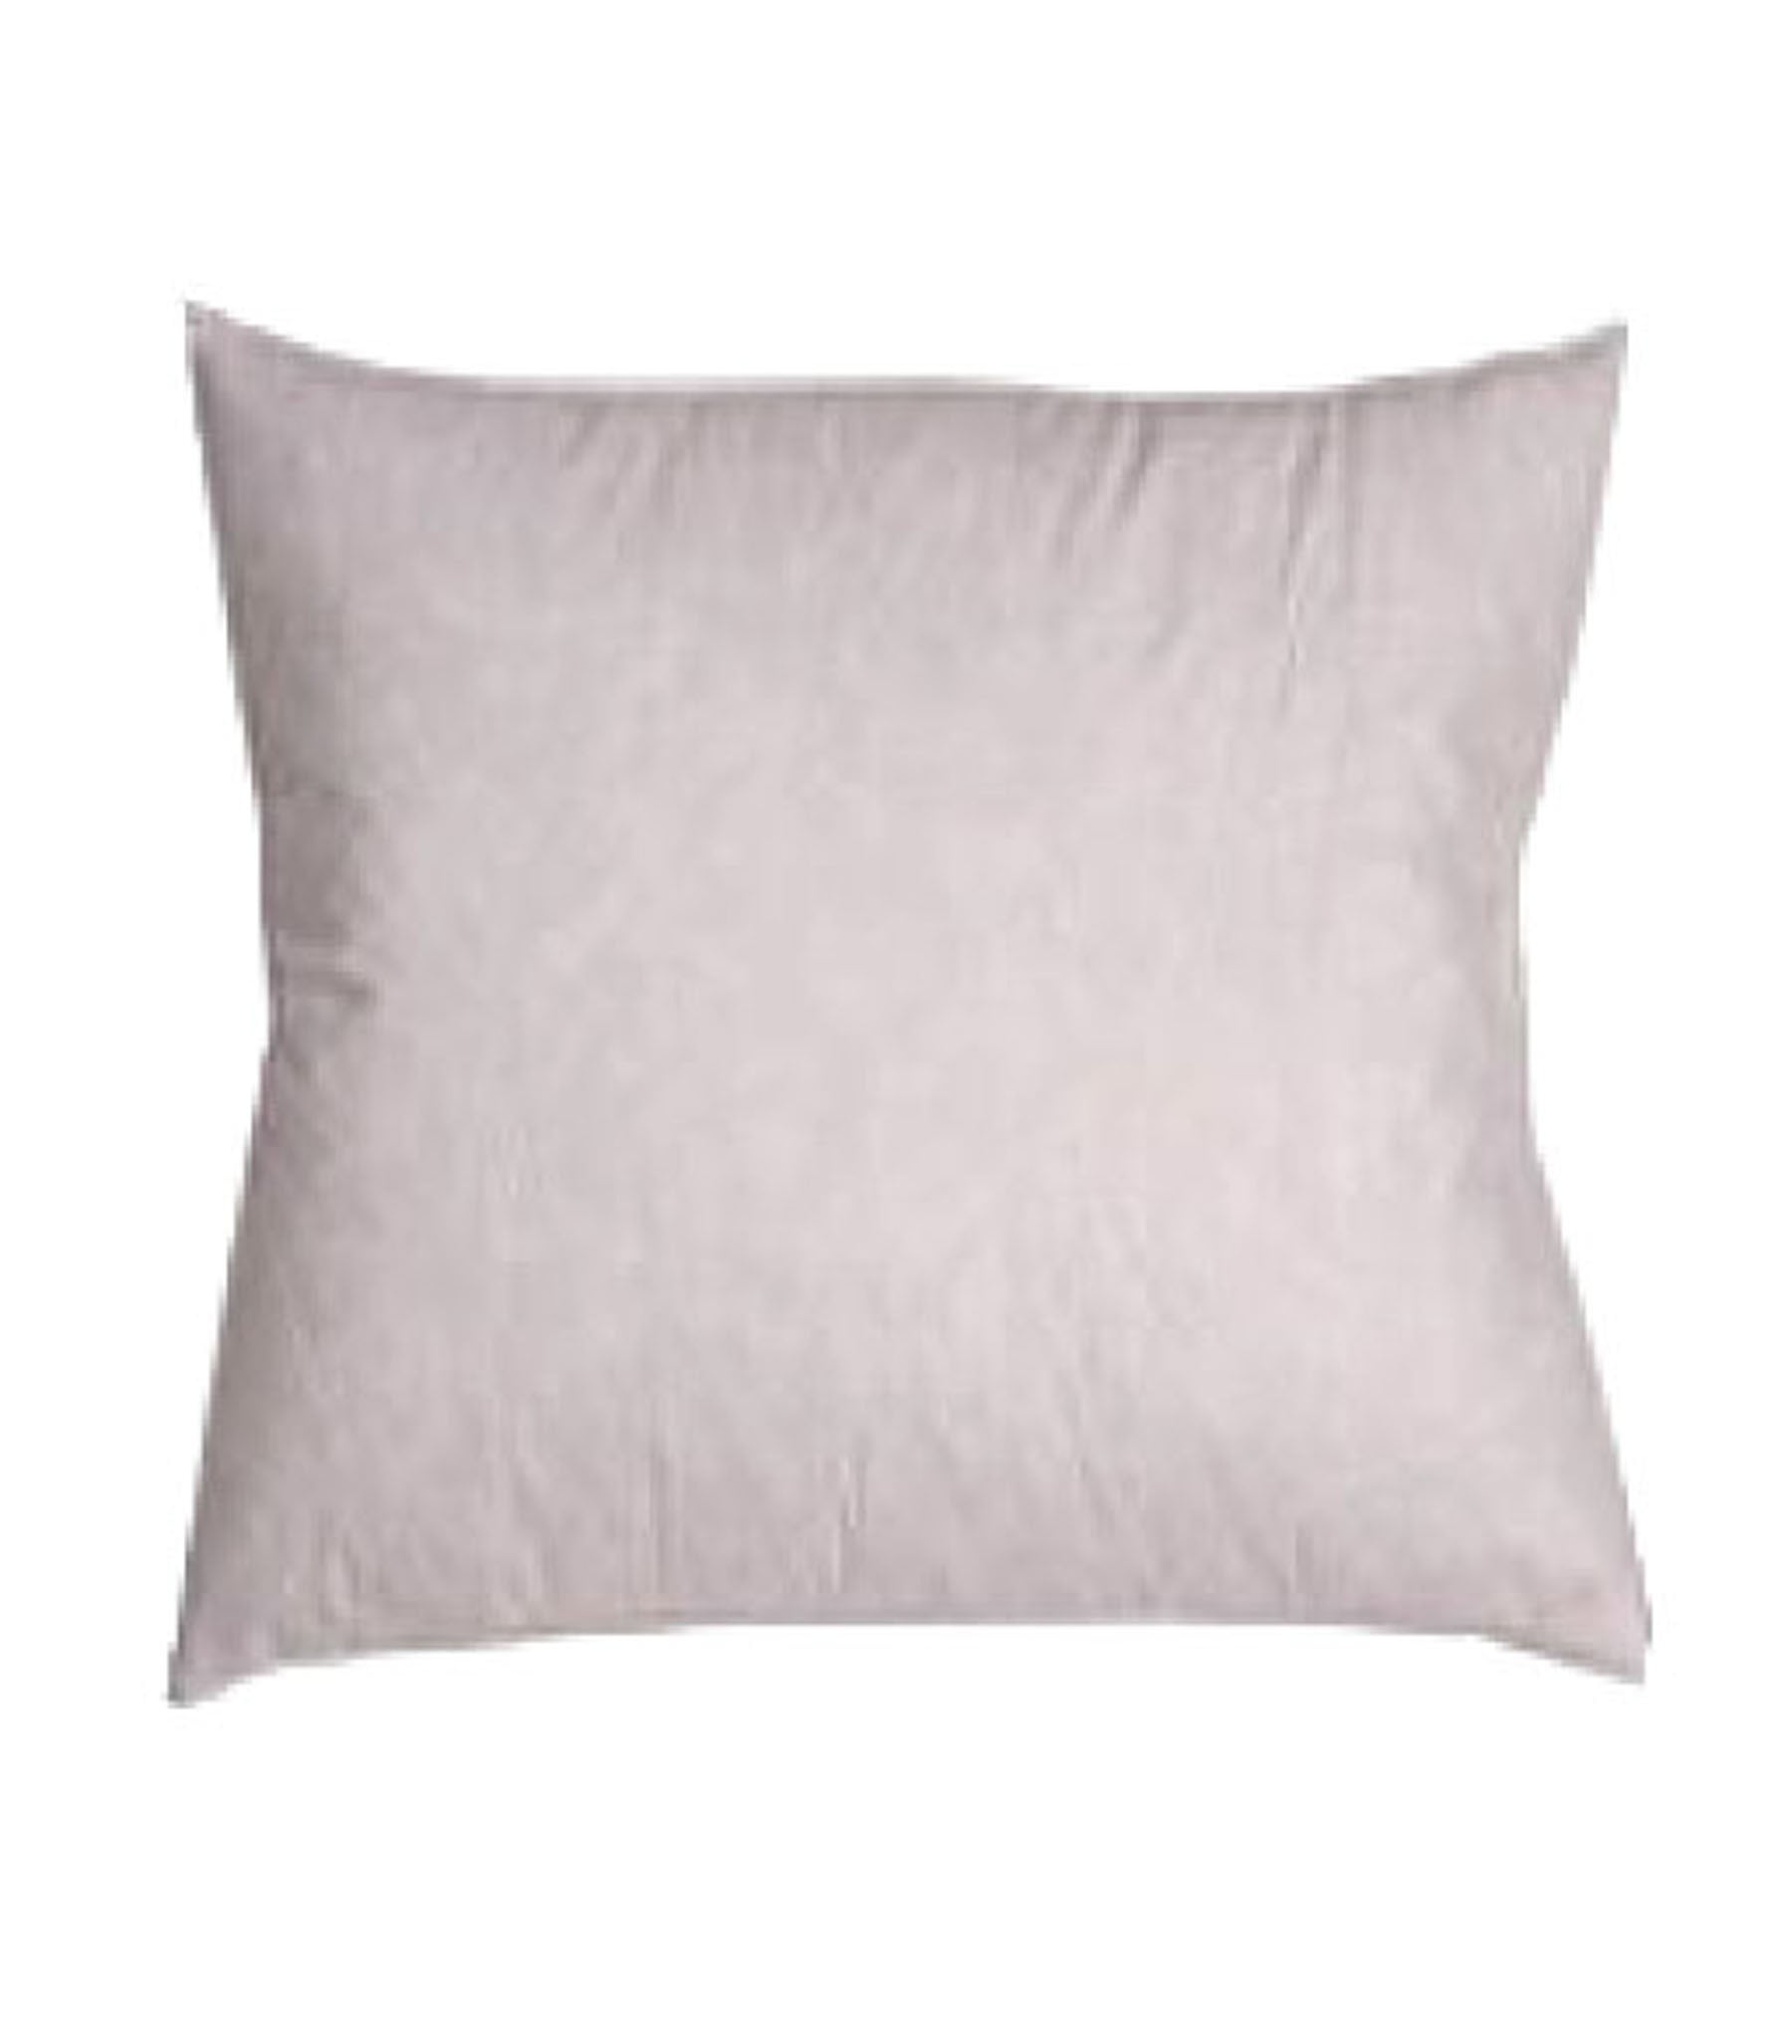  ACCENTHOME 18x18 Pillow Inserts (Pack of 2) Hypoallergenic  Throw Pillows Forms, White Square Throw Pillow Insert